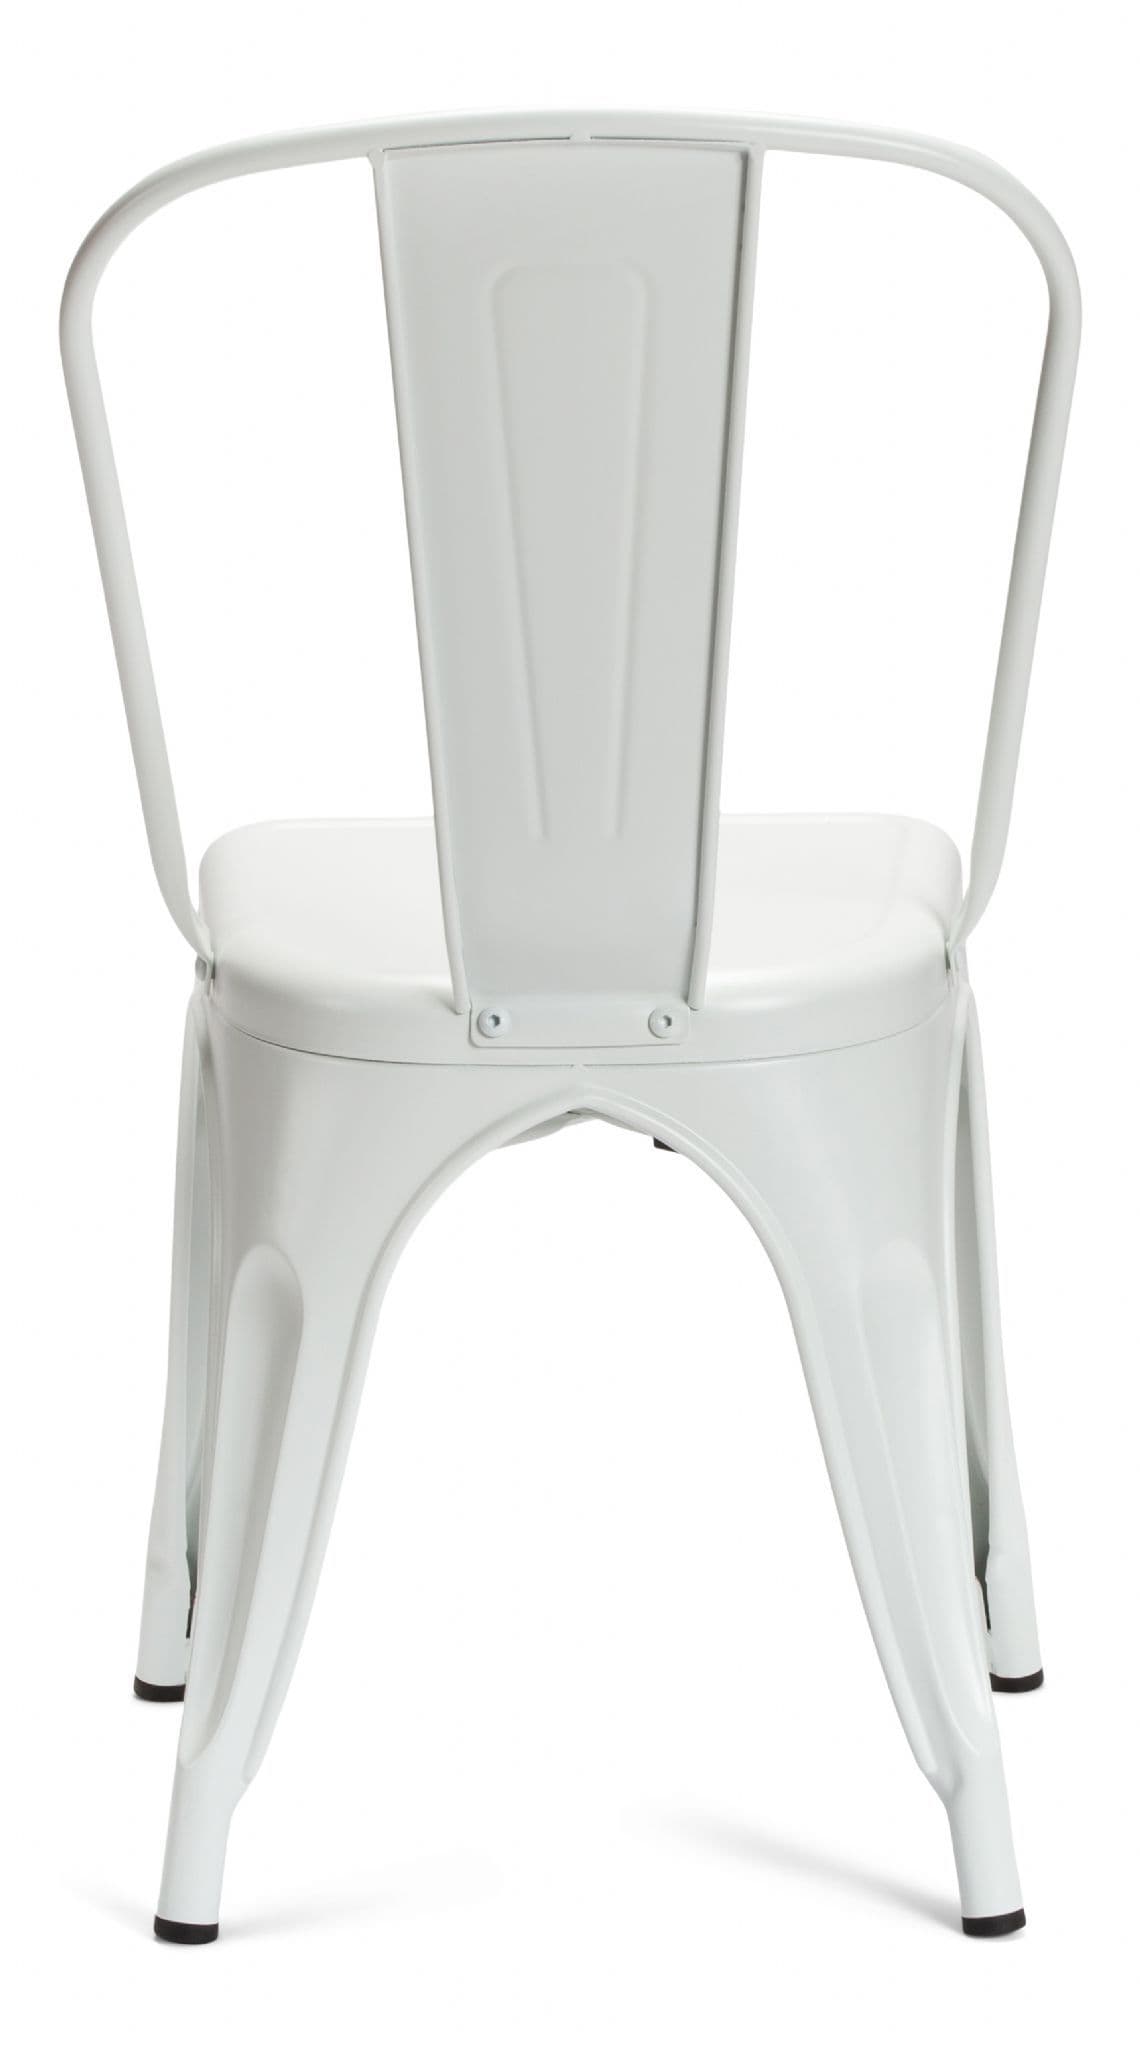 Matt White Metal Industrial Tolix Style Dining Chairs Rear View